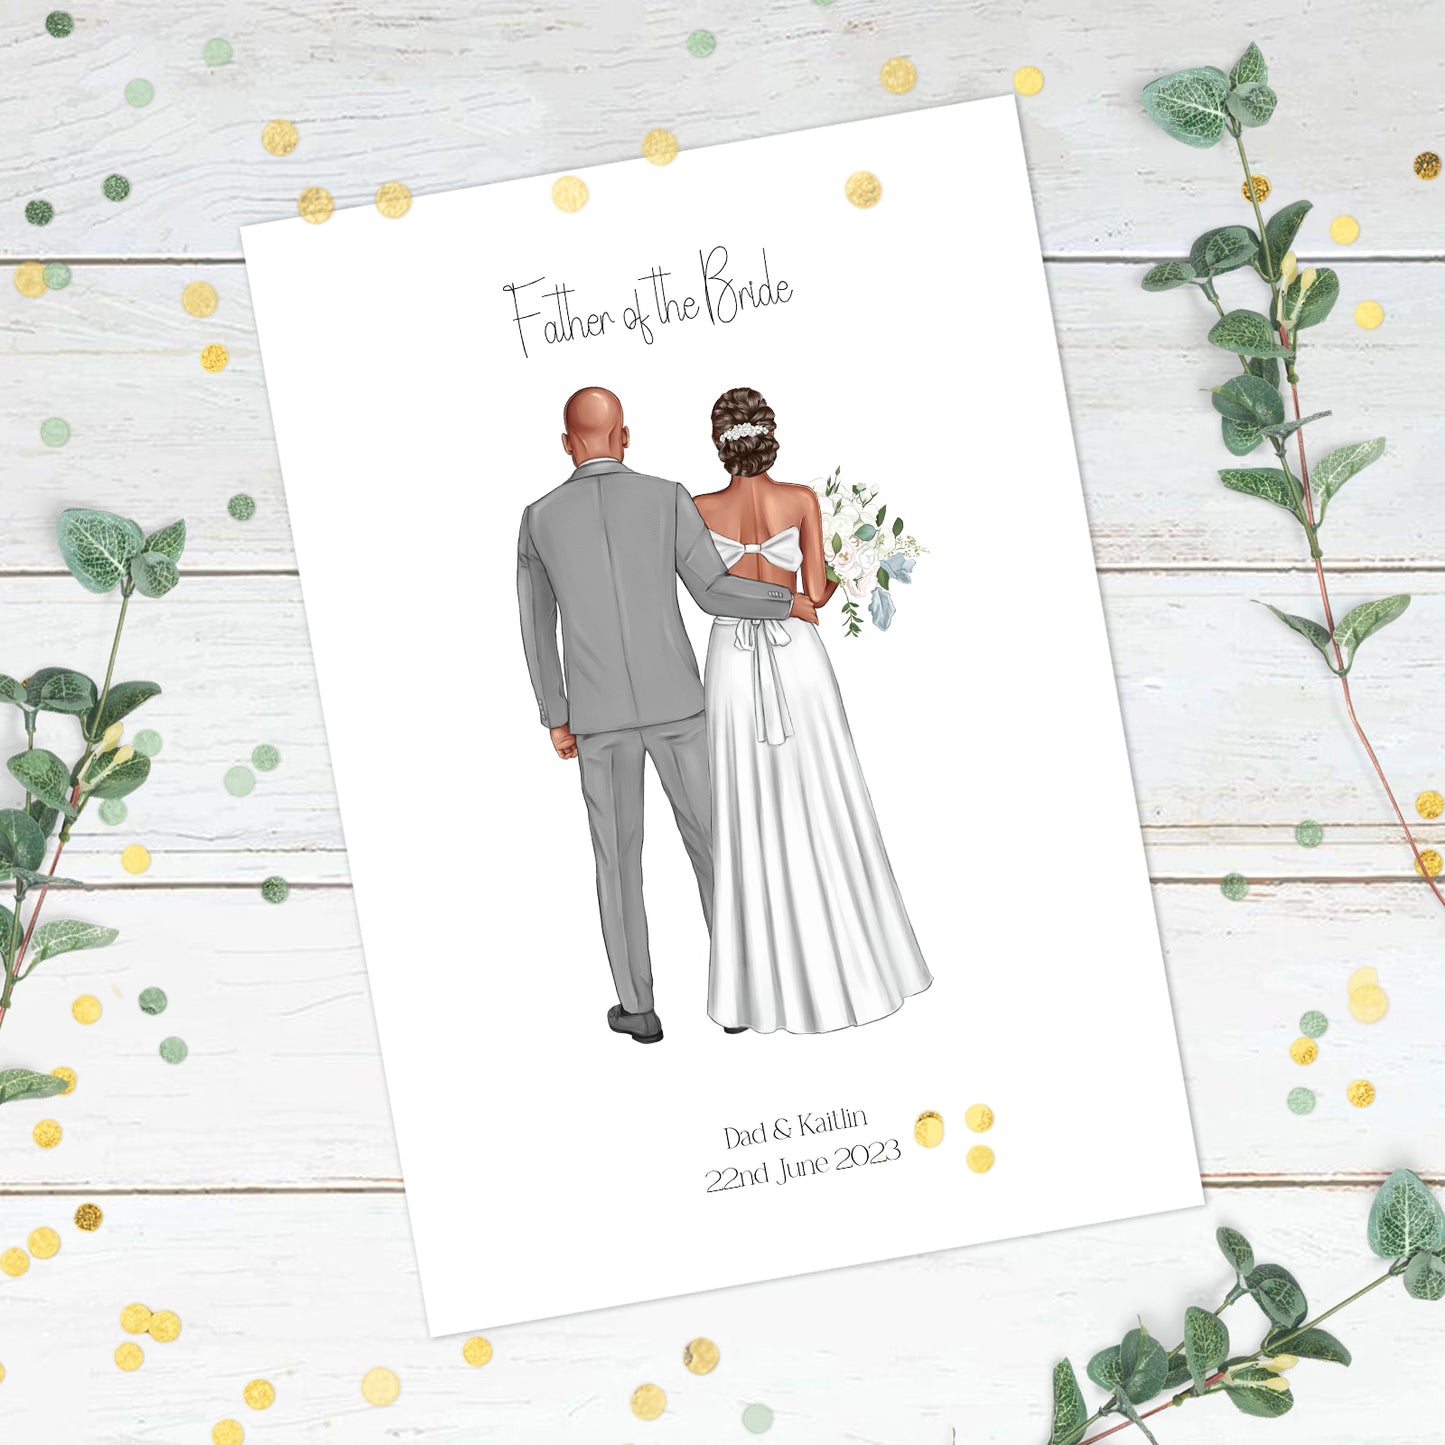 Personalised Bride & Father of the Bride Print